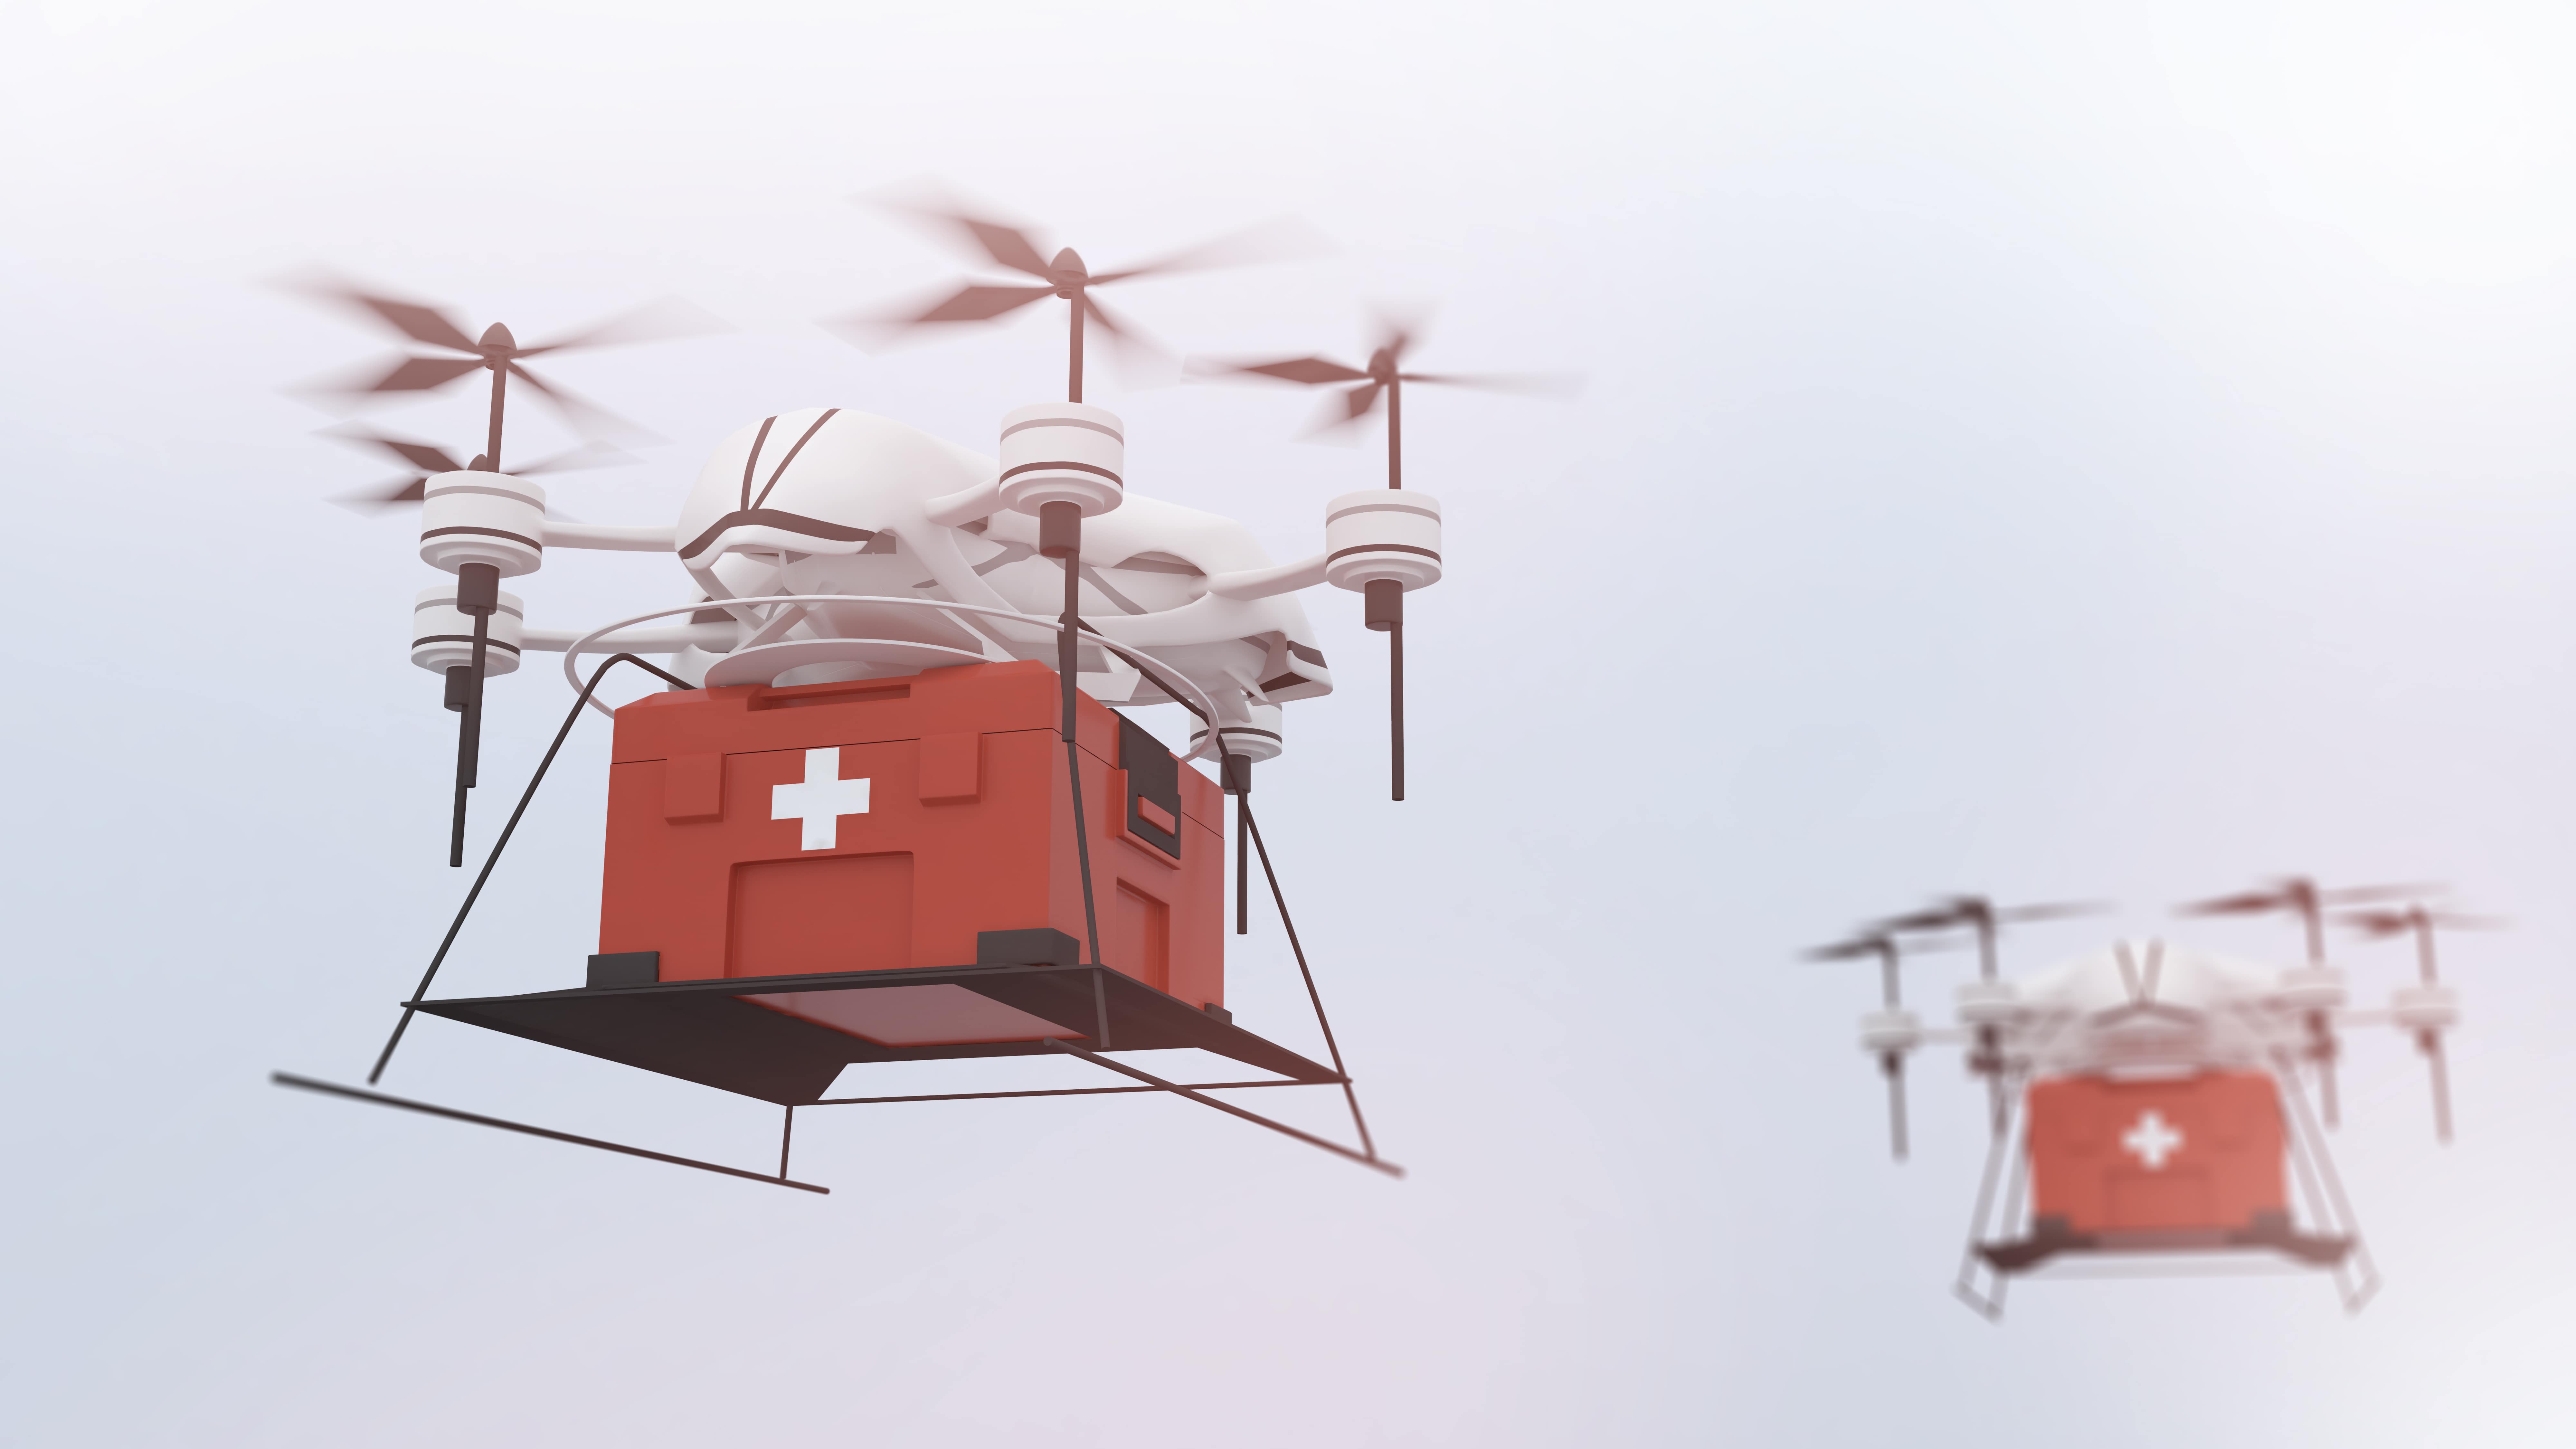 icmr-tests-drone-delivery-for-remote-healthcare-in-himachal-pradesh